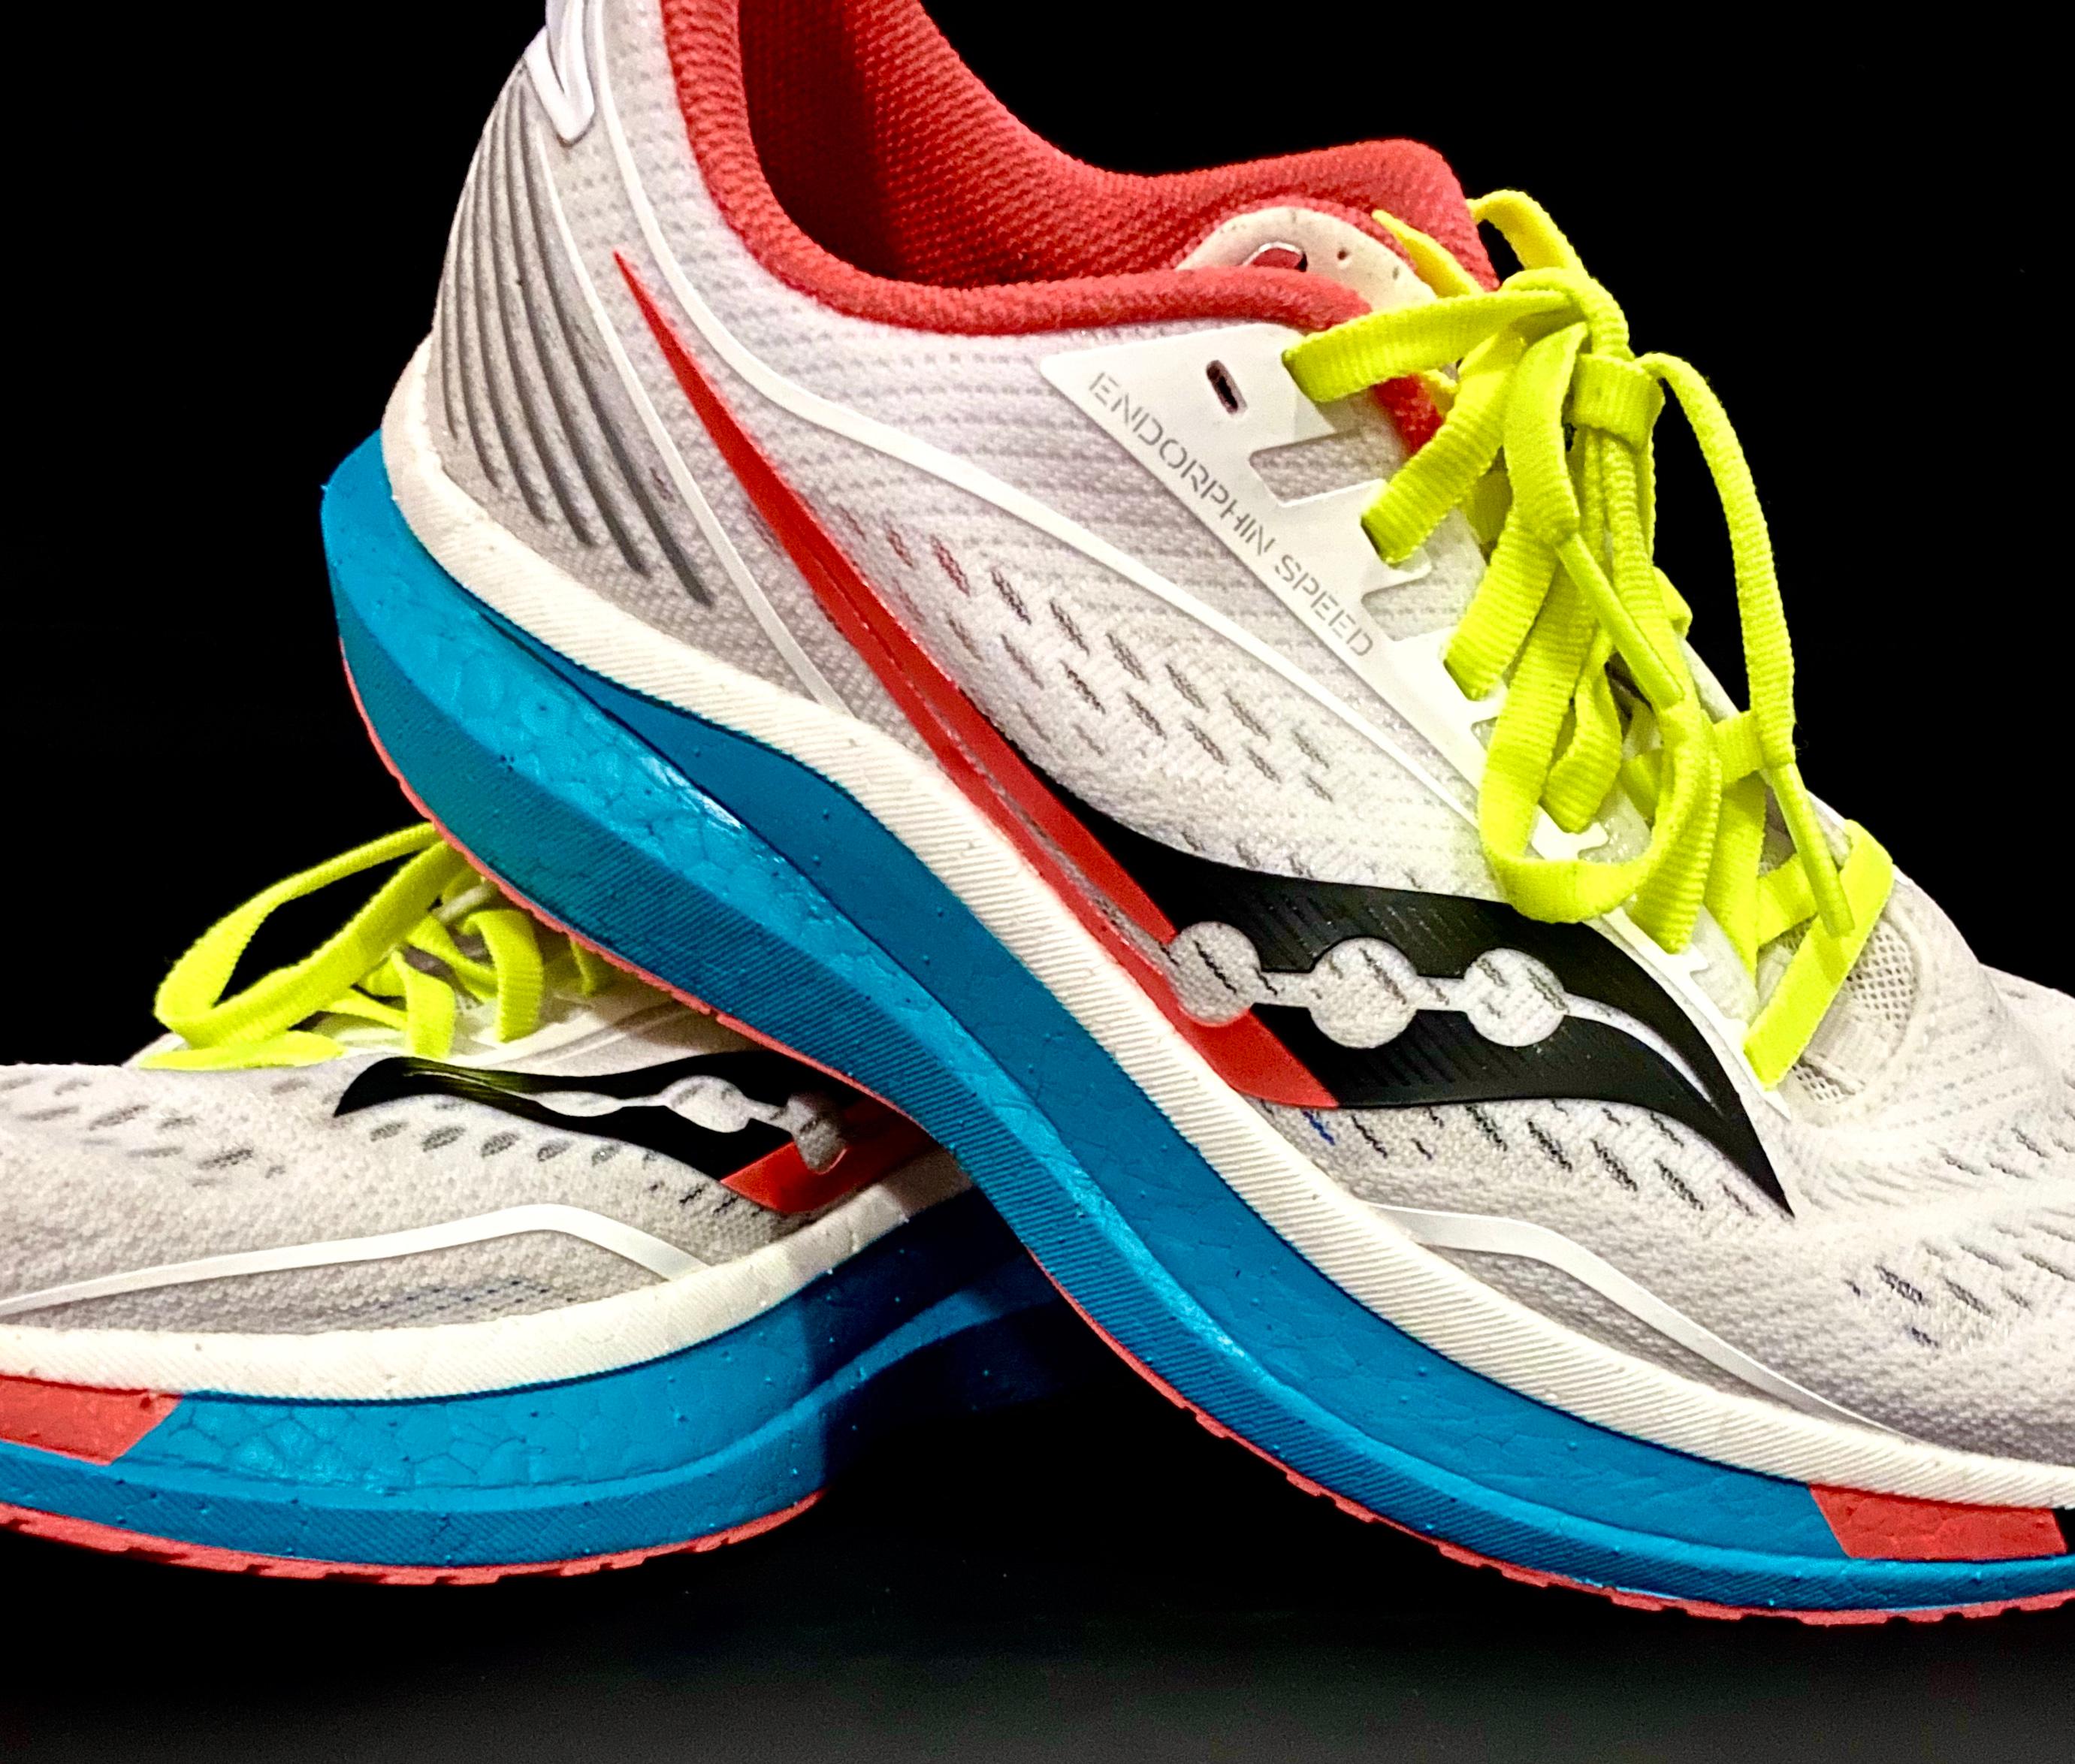 $160 + Review of Saucony Endorphin Speed | RunRepeat